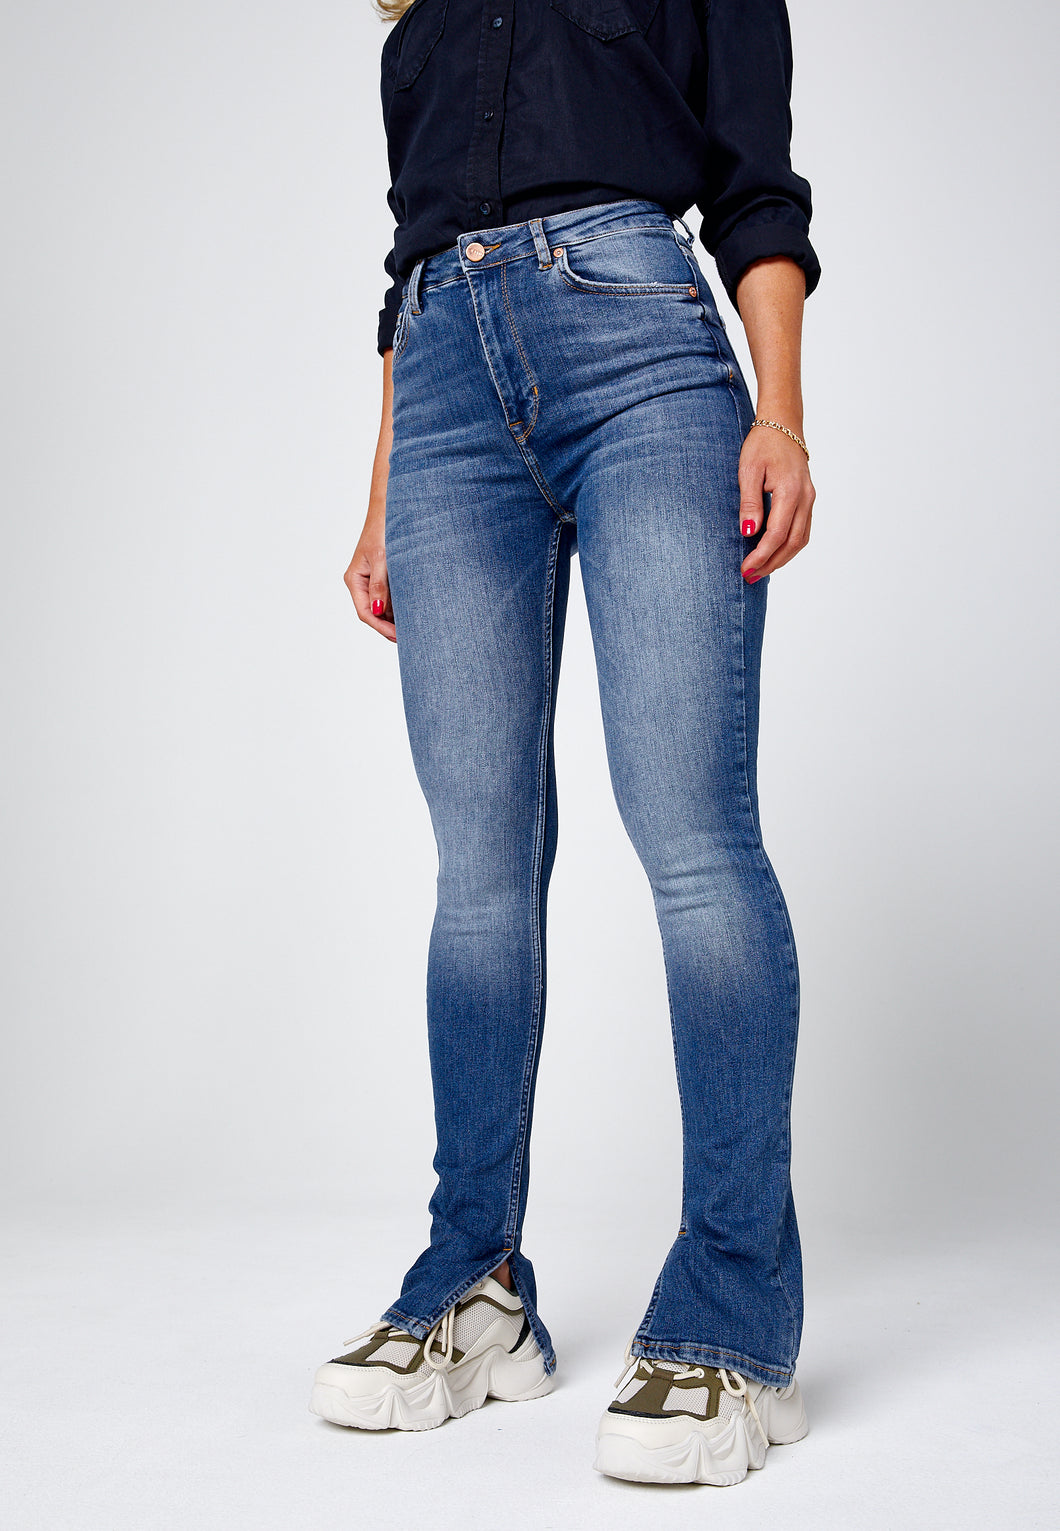 O-MORE' SHOE CUT JEANS – the ODENIM 